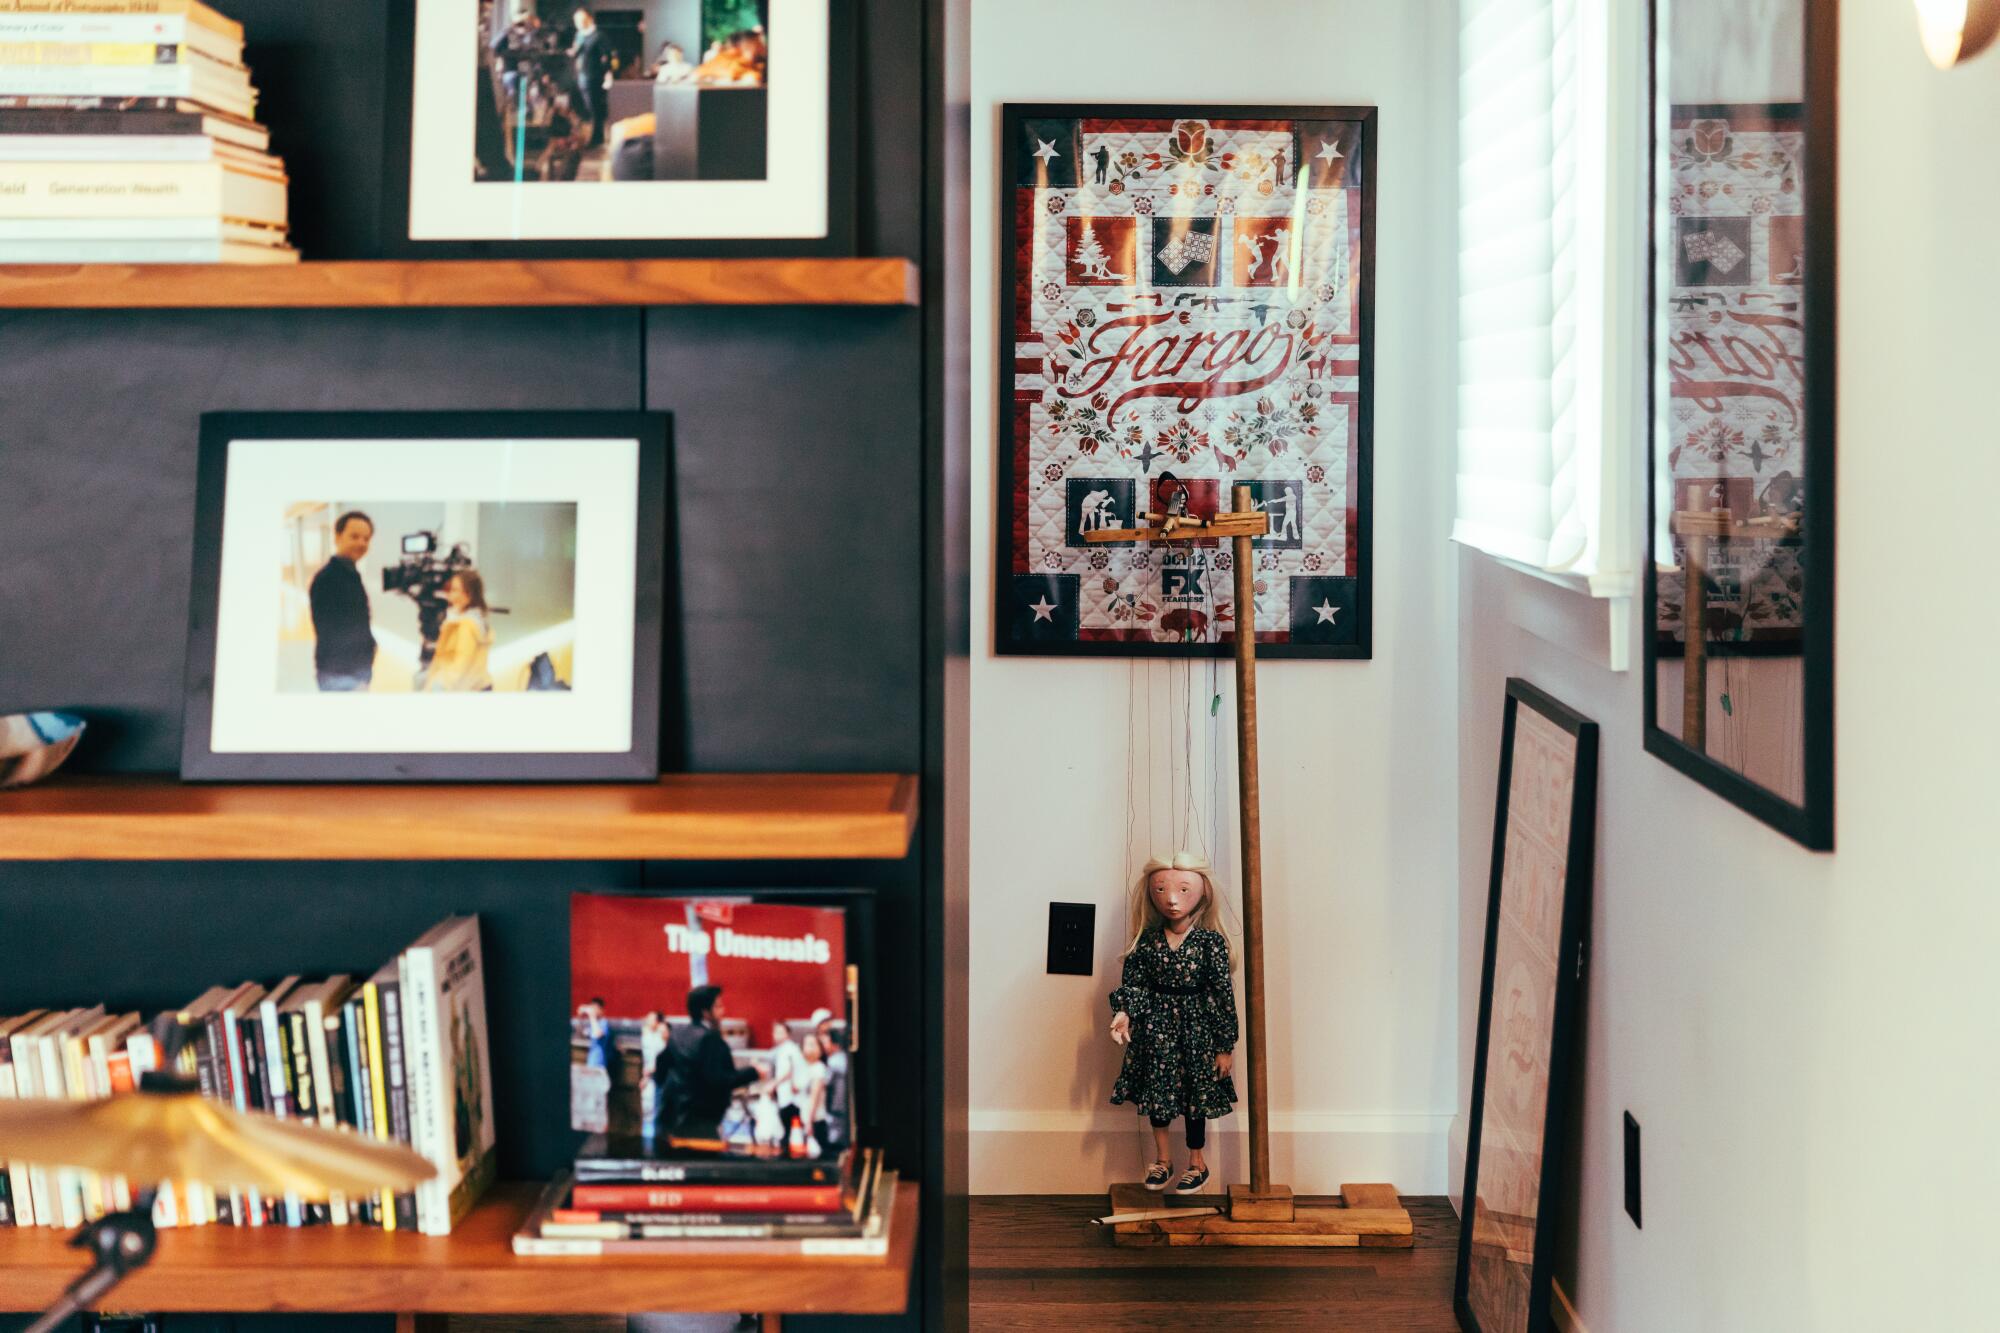 The bookshelf and wall of an office lined with books, photographs and a 'Fargo' poster.